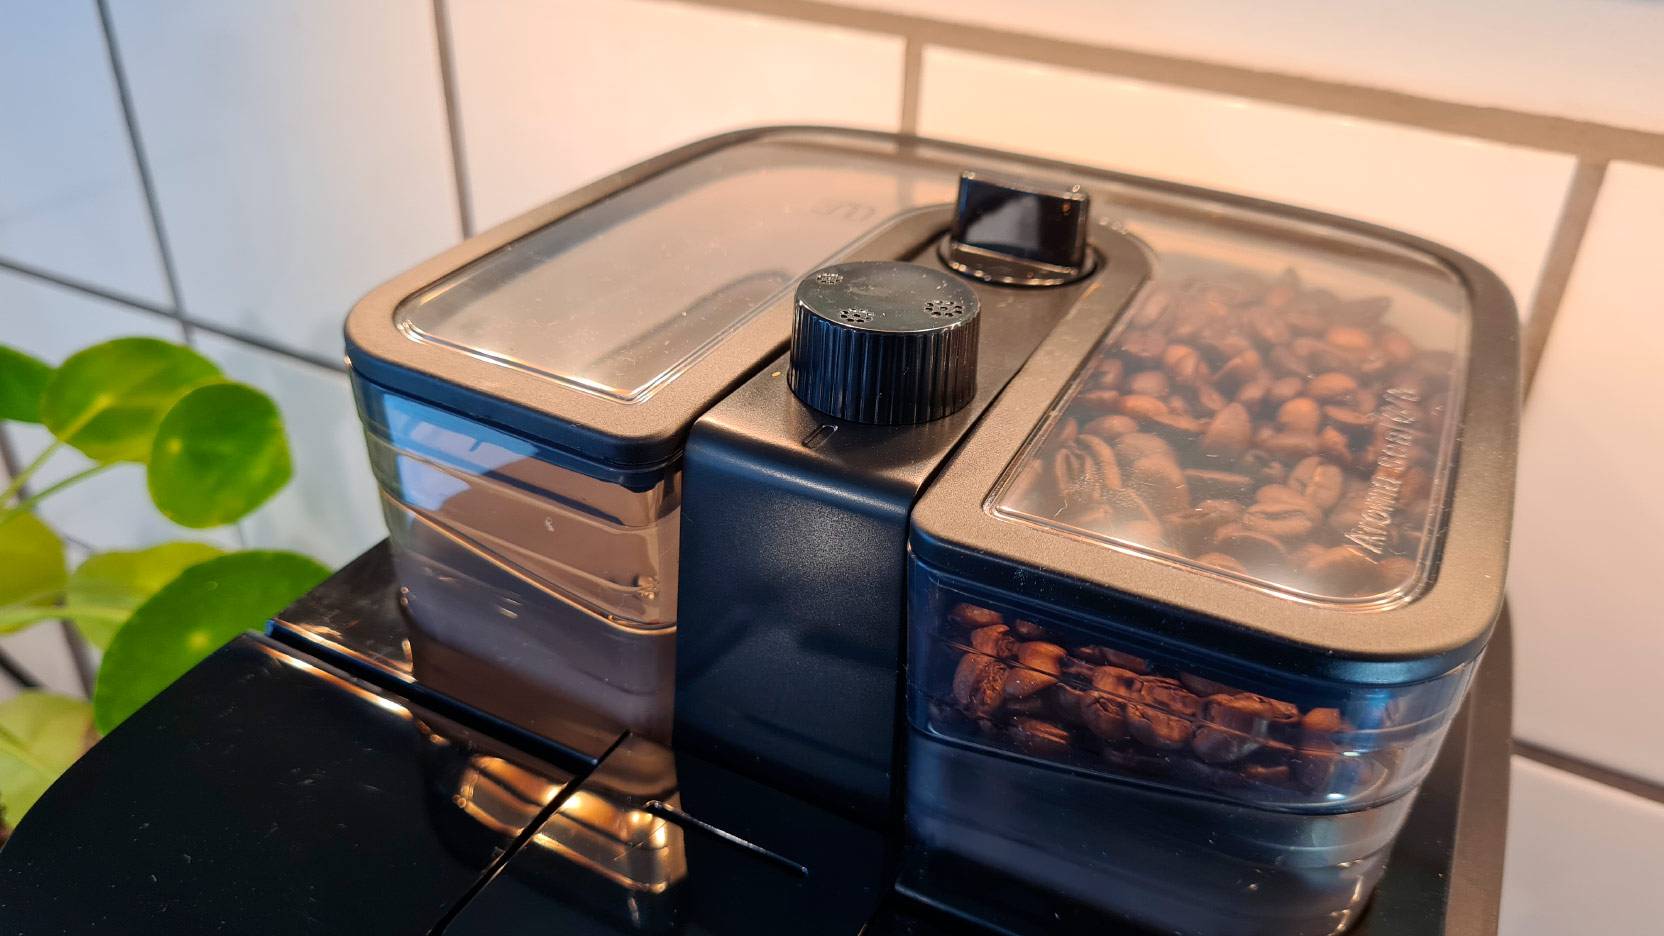 Image of the two-section container for whole coffee beans in the Philips Grind and Brew HD7769 coffee machine with built-in coffee grinder